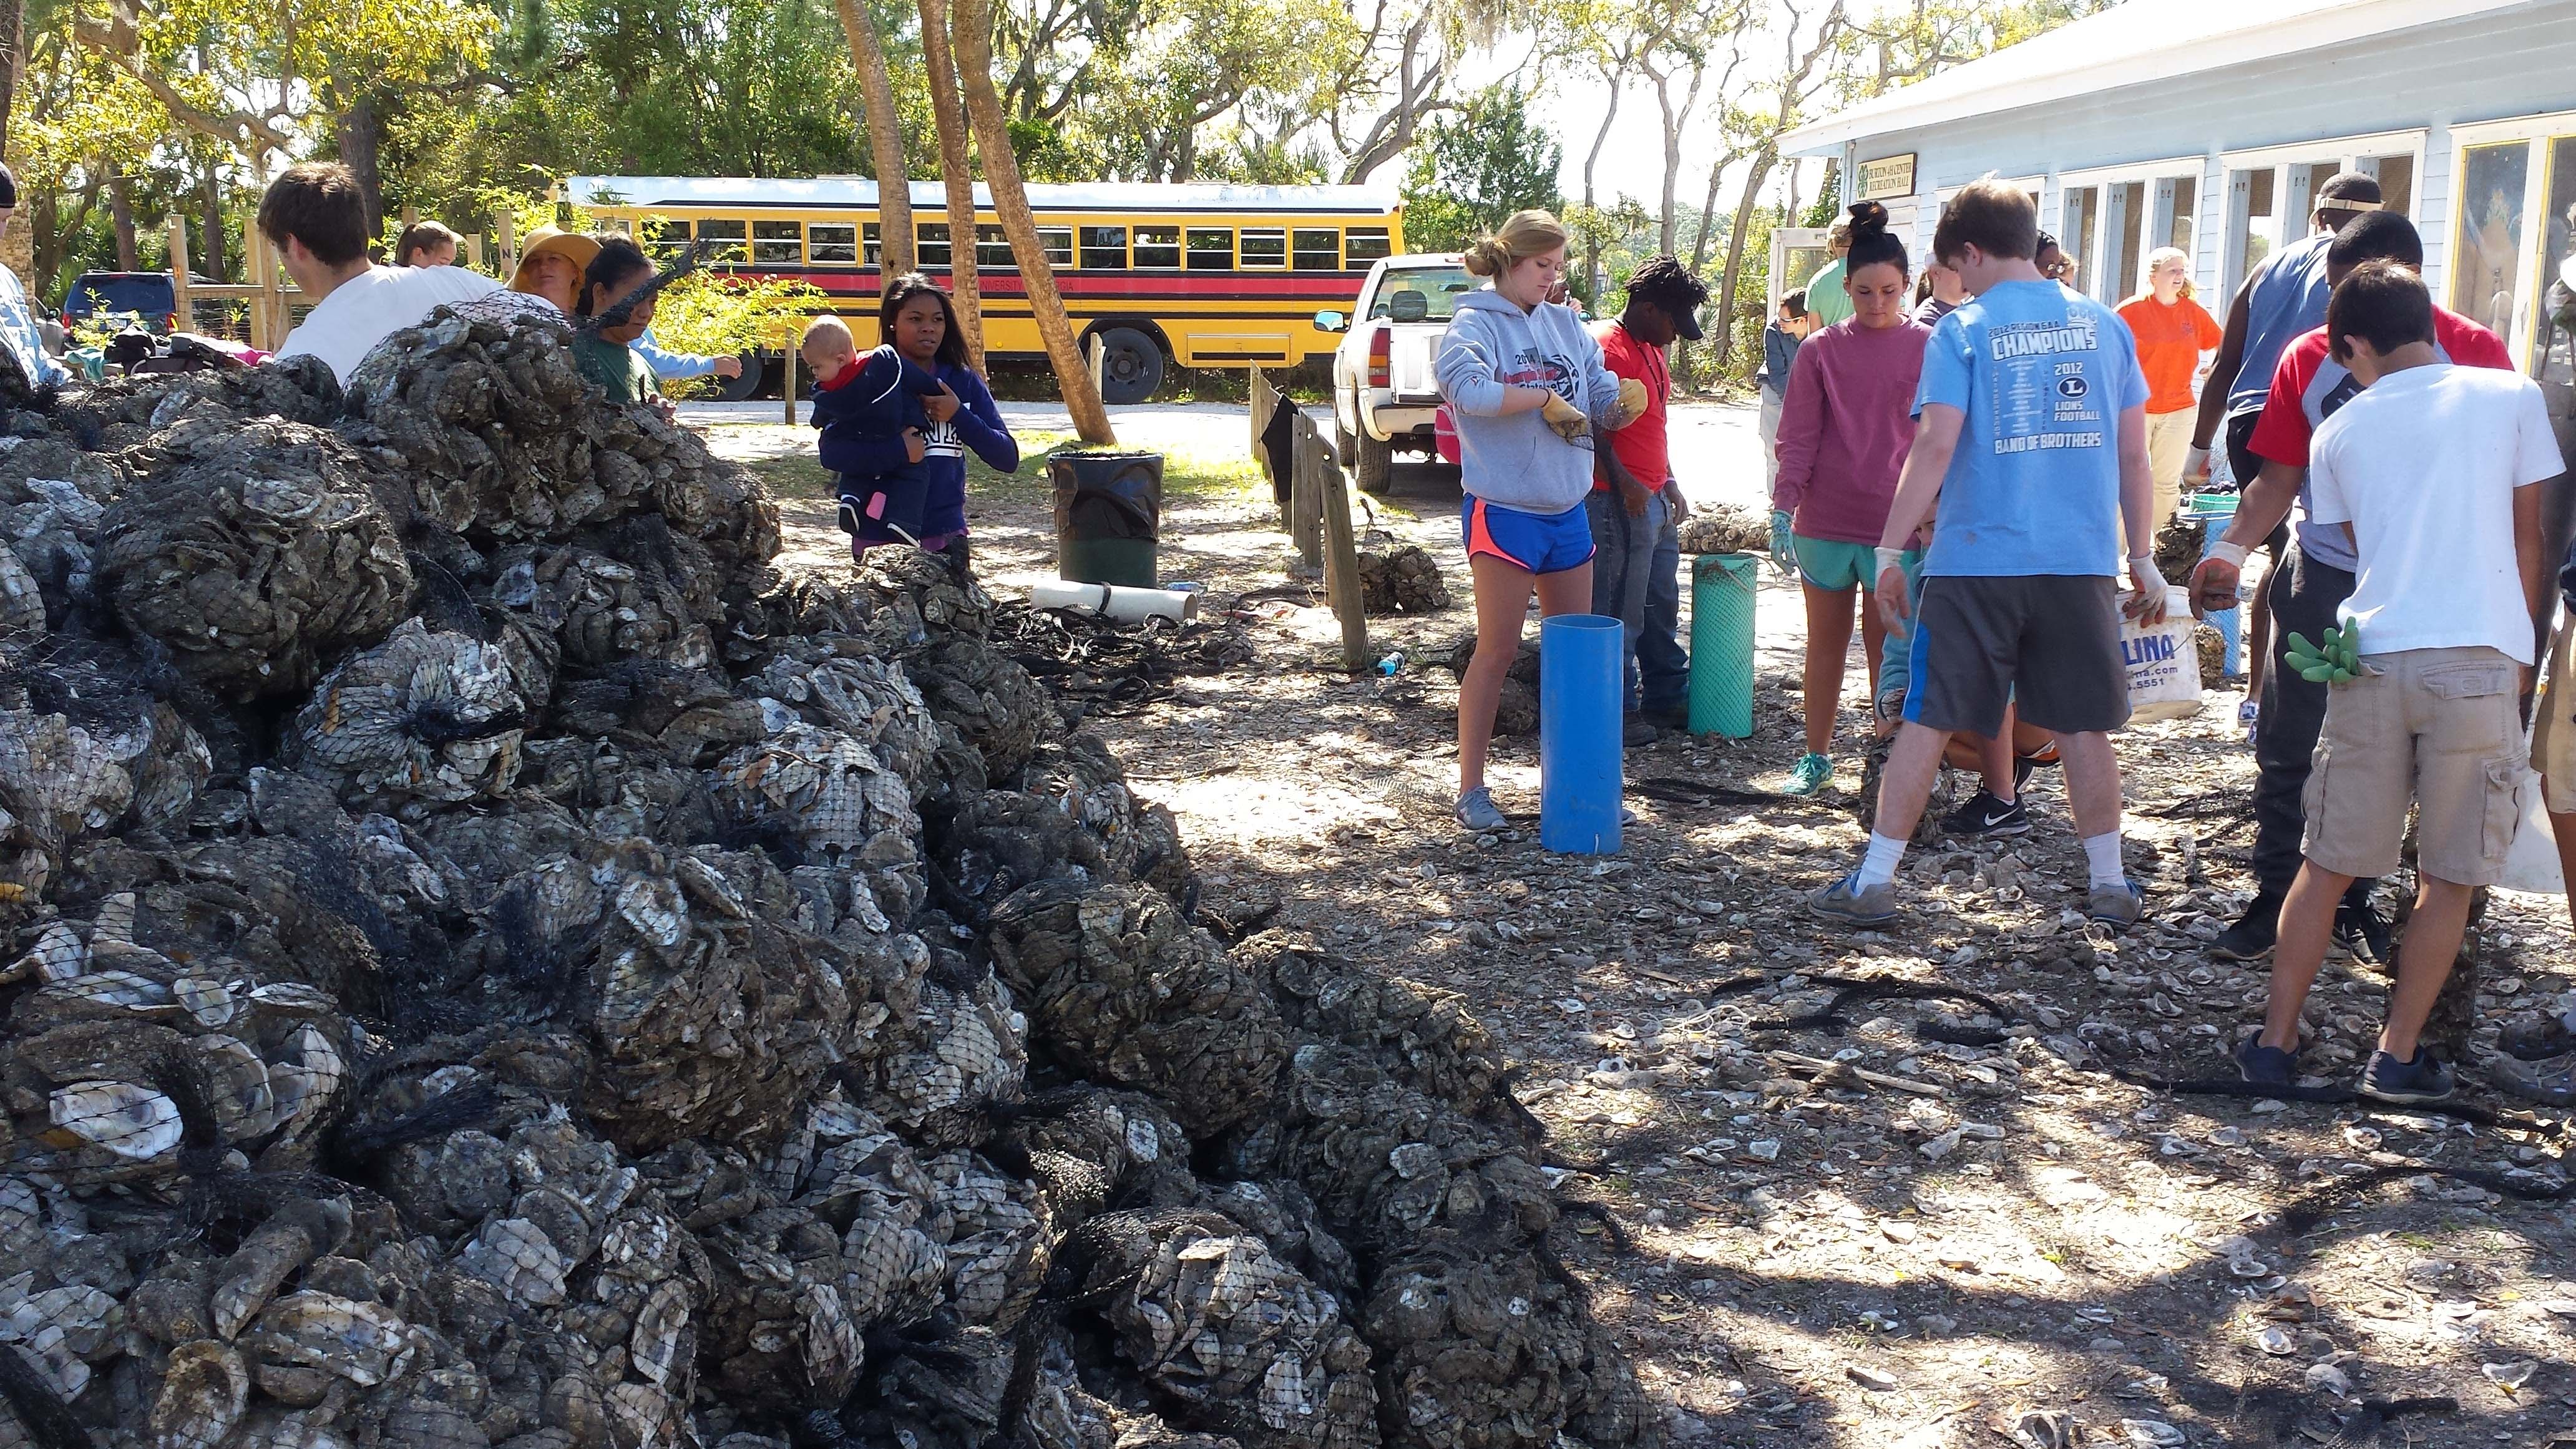 Volunteers fill Naltex bags with oyster shells at Burton 4-H Center on Tybee Island on April 9 to help build a living shoreline to prevent erosion at the environmental education center.